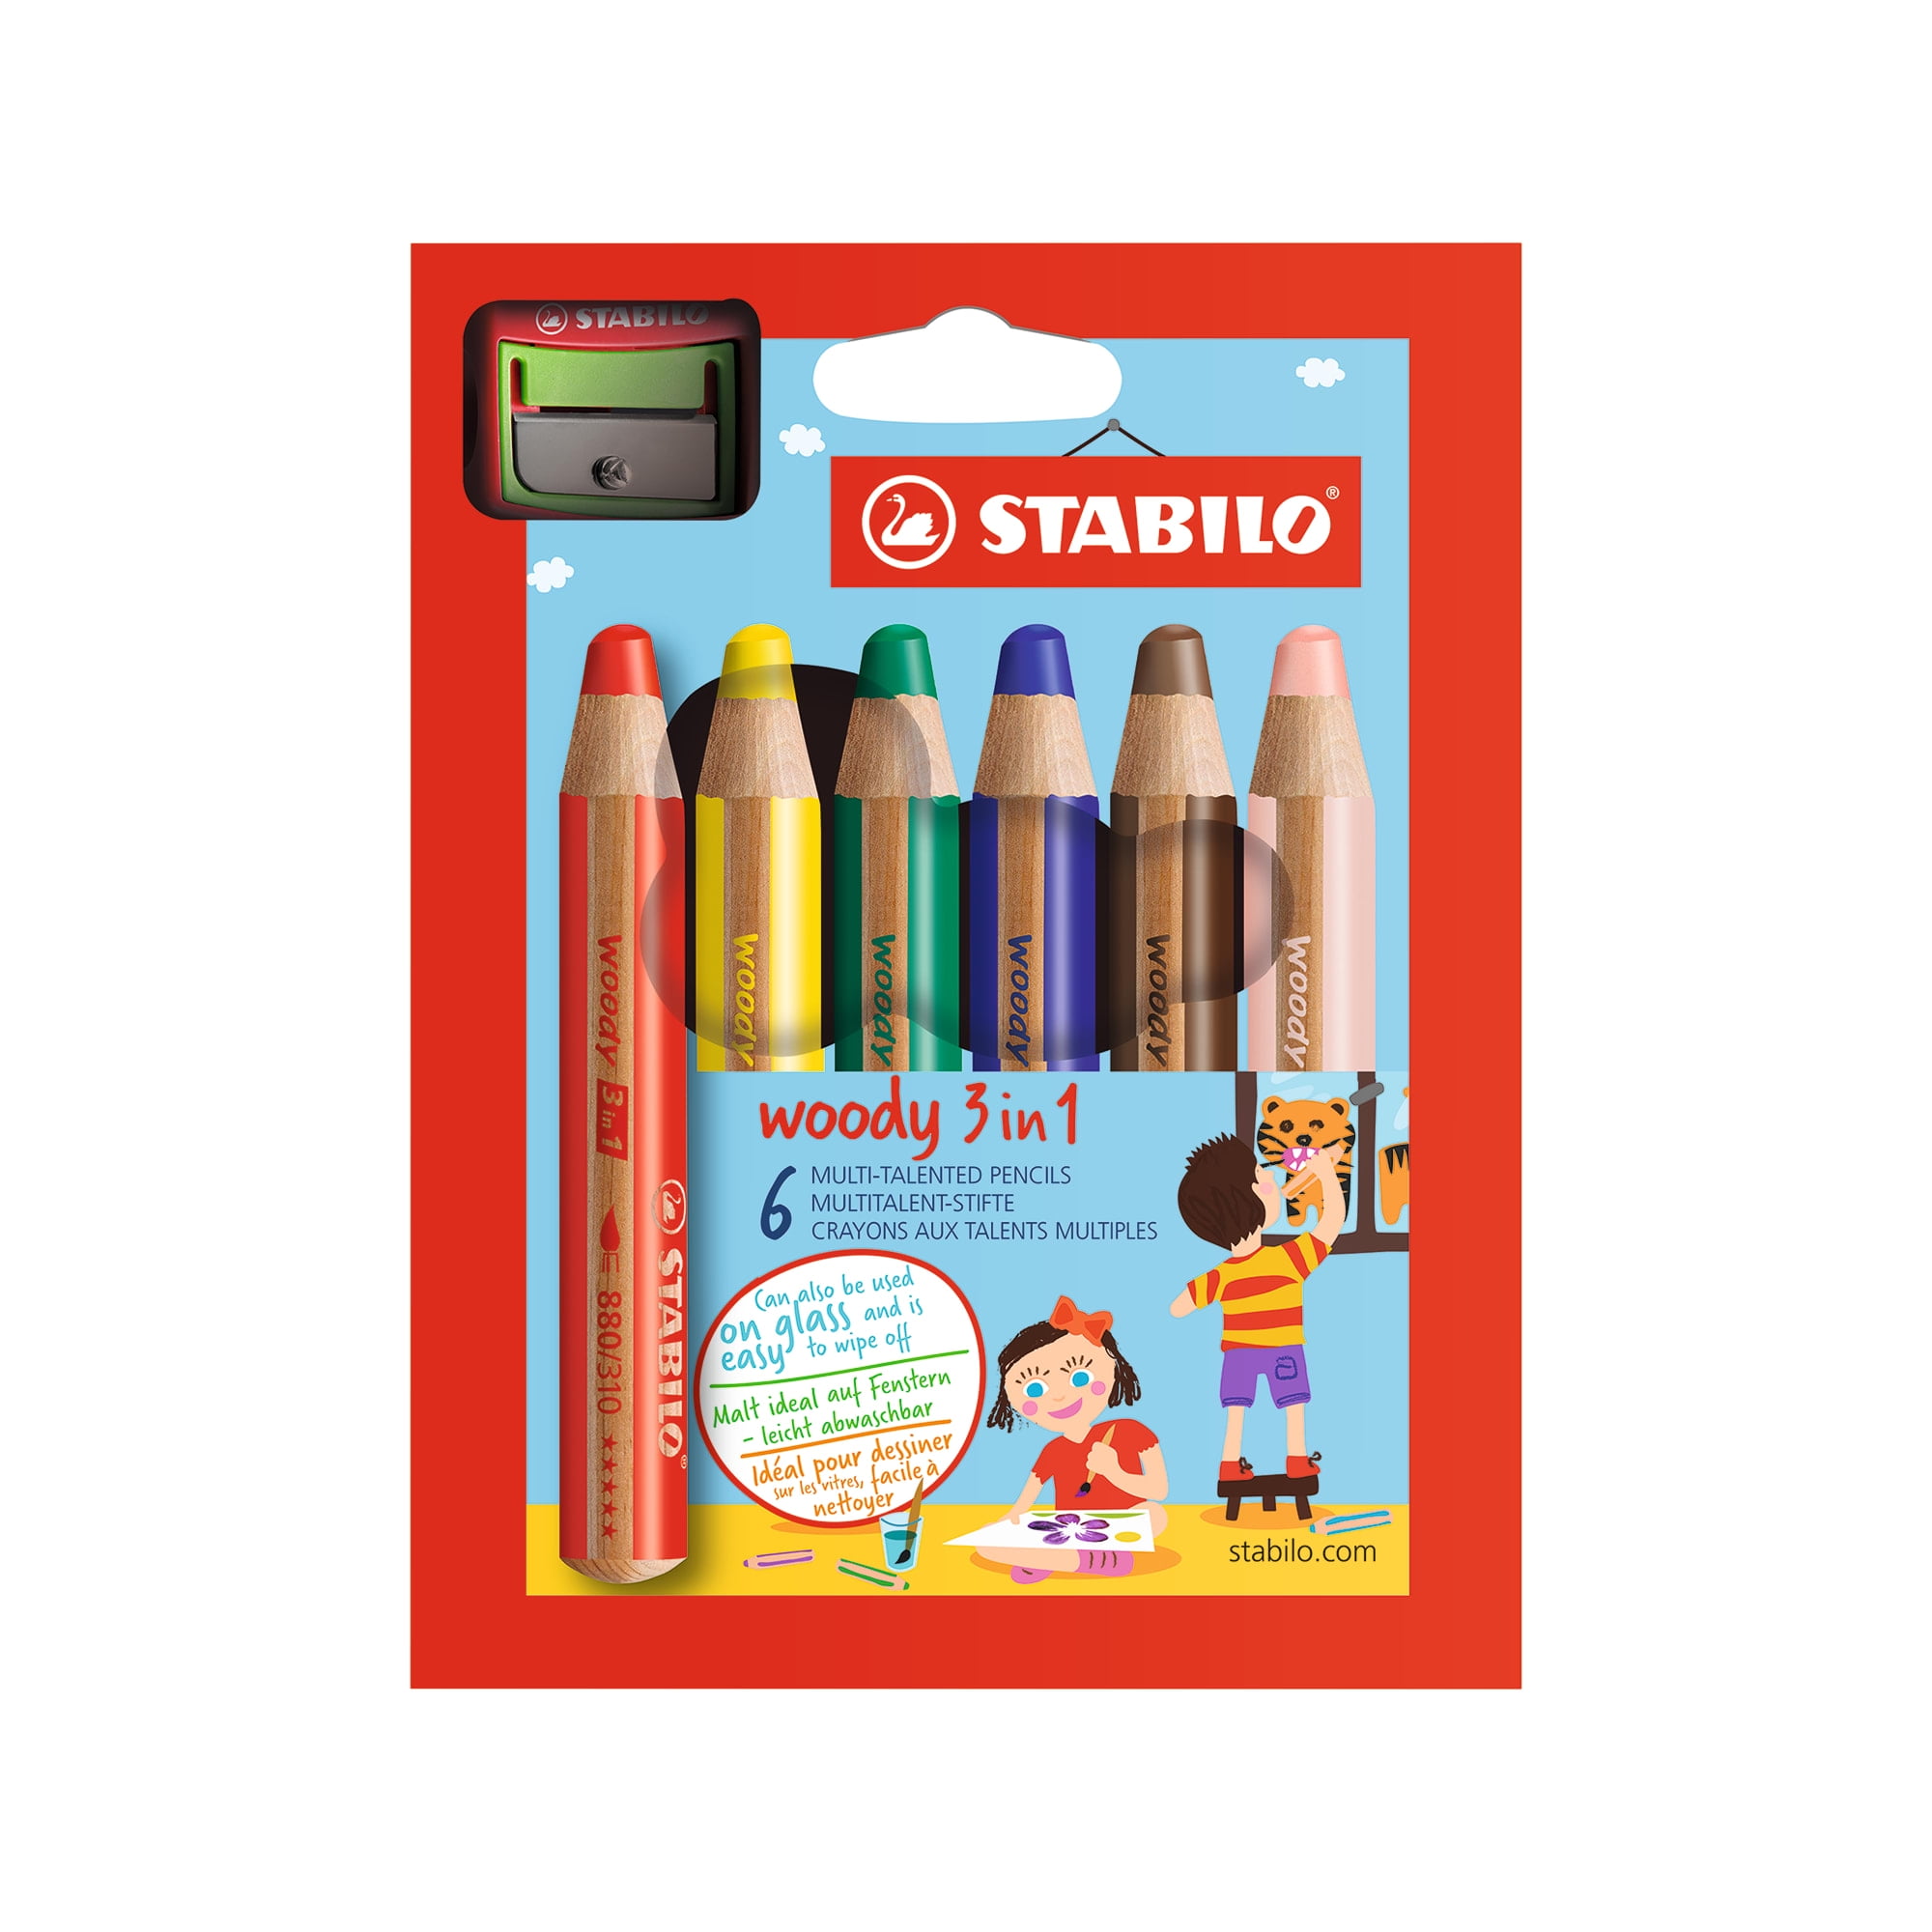 Stabilo Woody 3 in 1 Maxy Crayon - Case of 6, Sharpener Included unisex  (bambini)